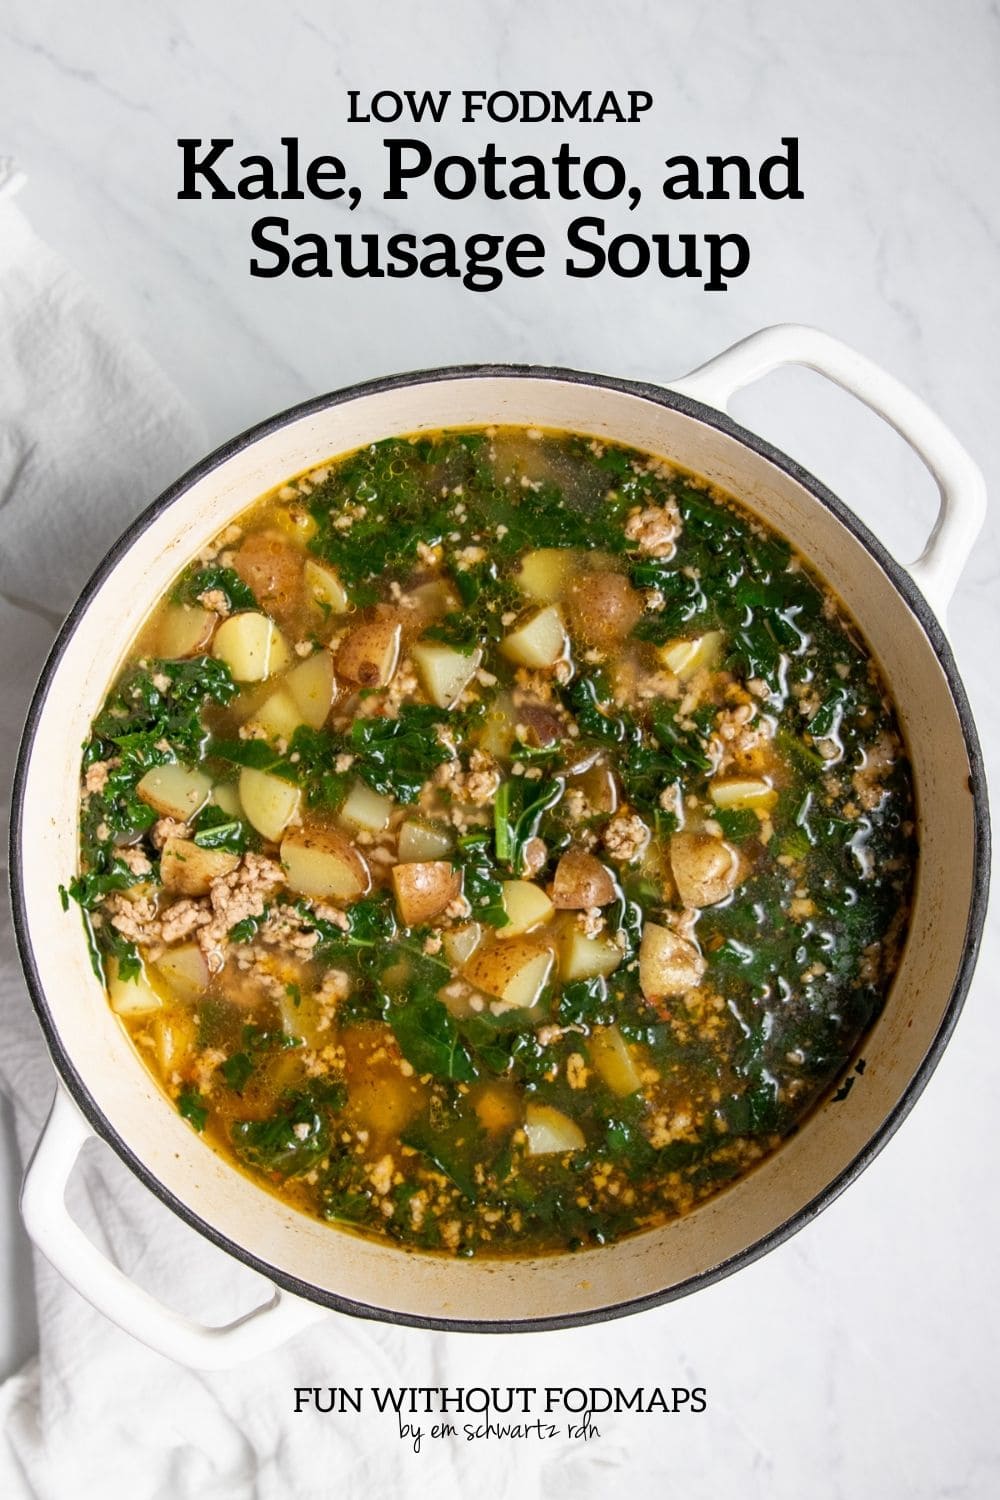 A Dutch oven filled with soup. In the white space above, black text reads "Low FODMAP Kale, Potato, and Sausage Soup."